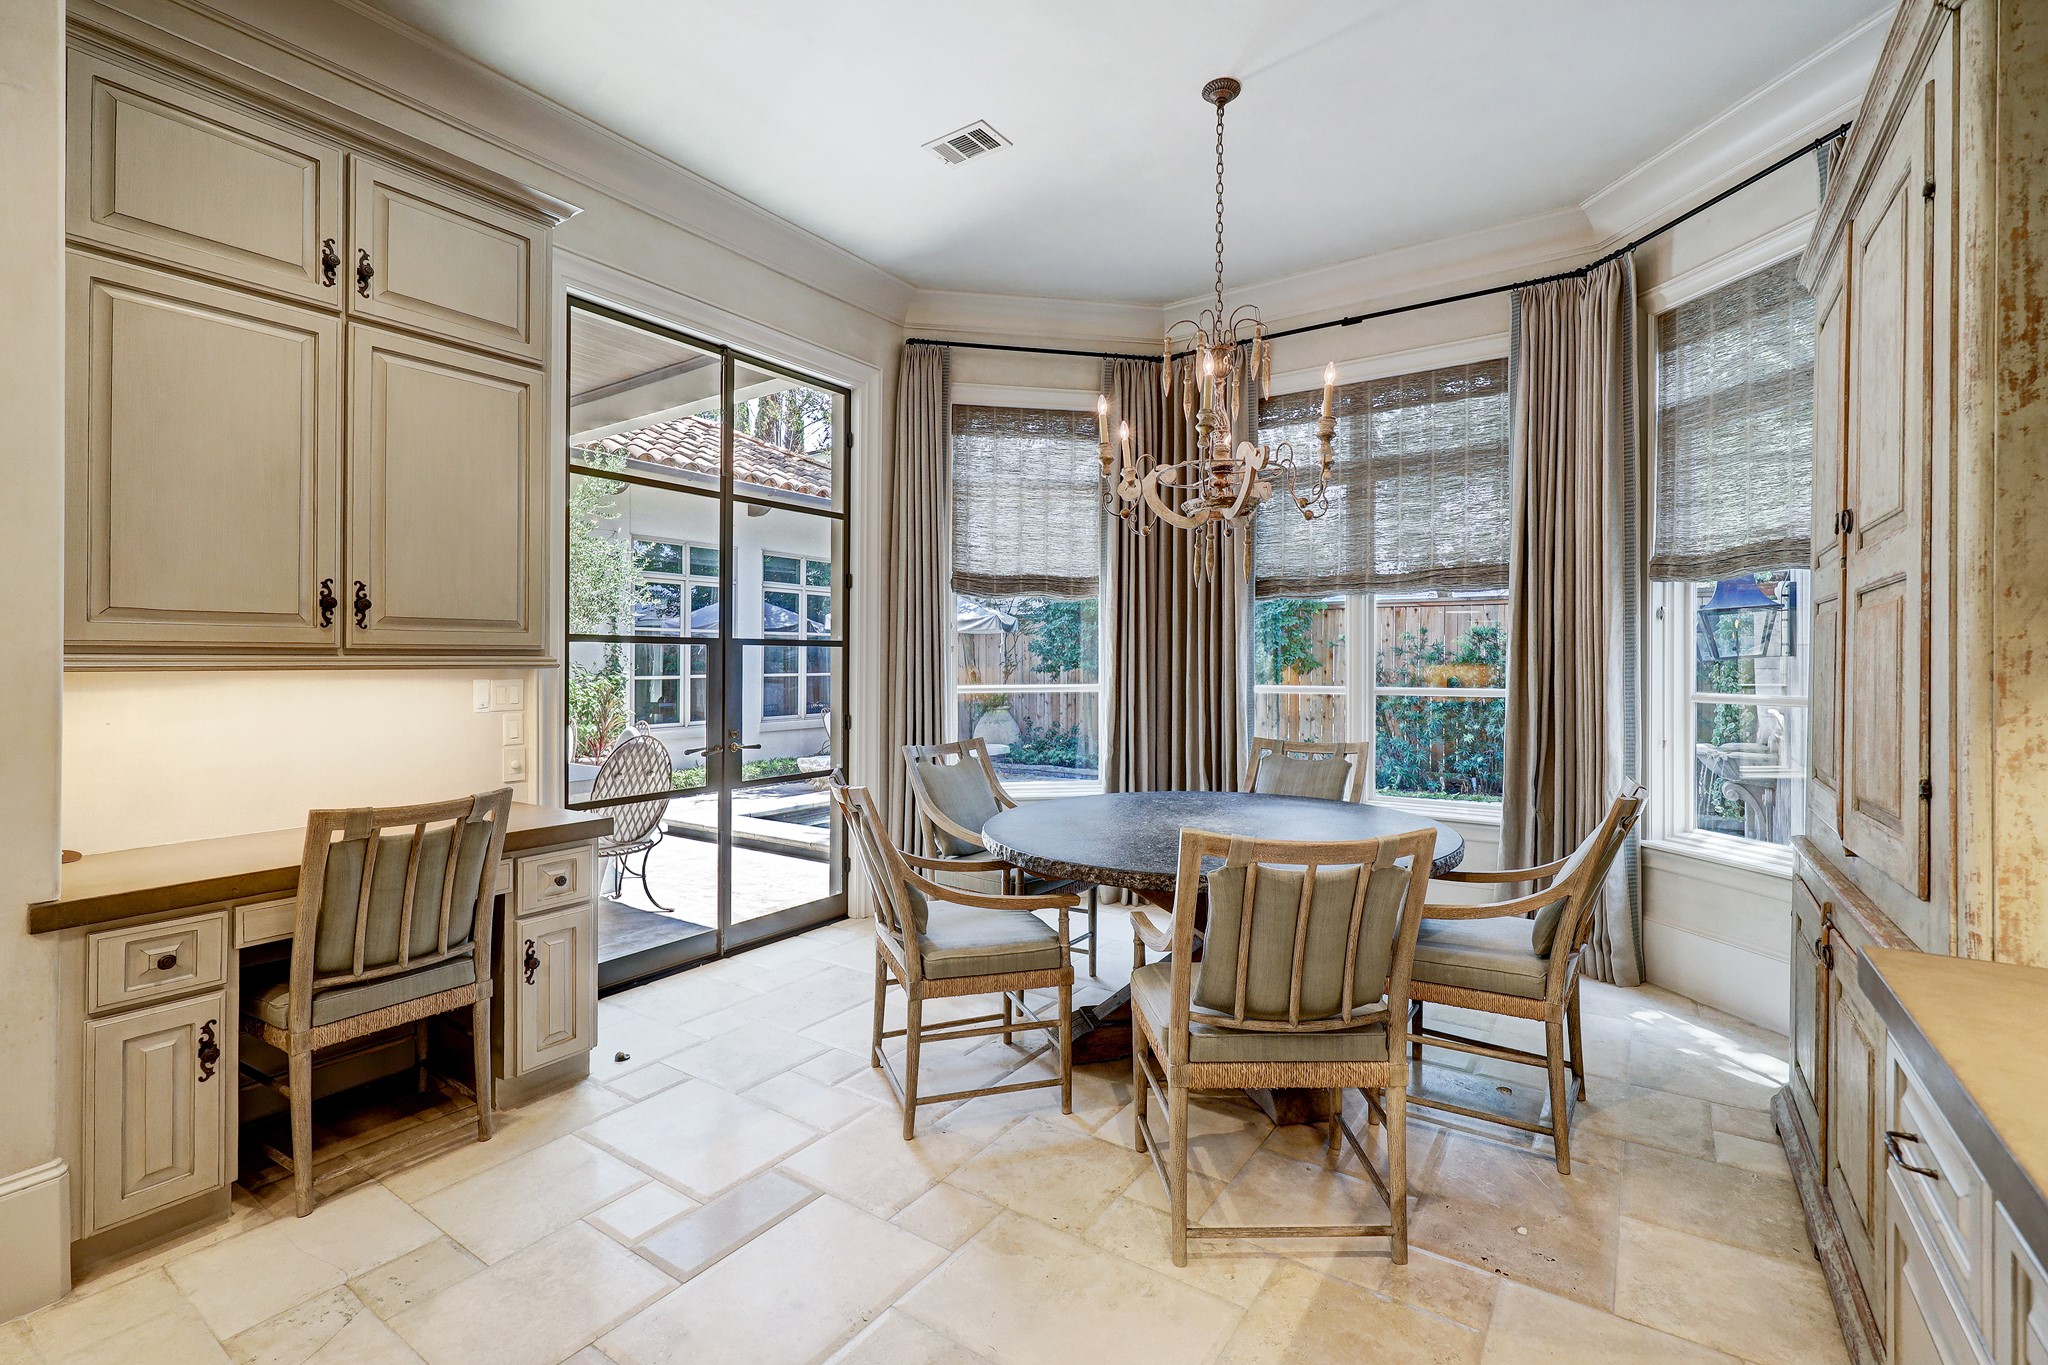 The breakfast area, warmly luminated by a mid-1800s French brass chandelier and the natural light from a vast expanse of windows, offers a panoramic view of the tranquil waters of the pool, while the robust yet elegant steel-framed glass doors provide a stately transition to the veranda.